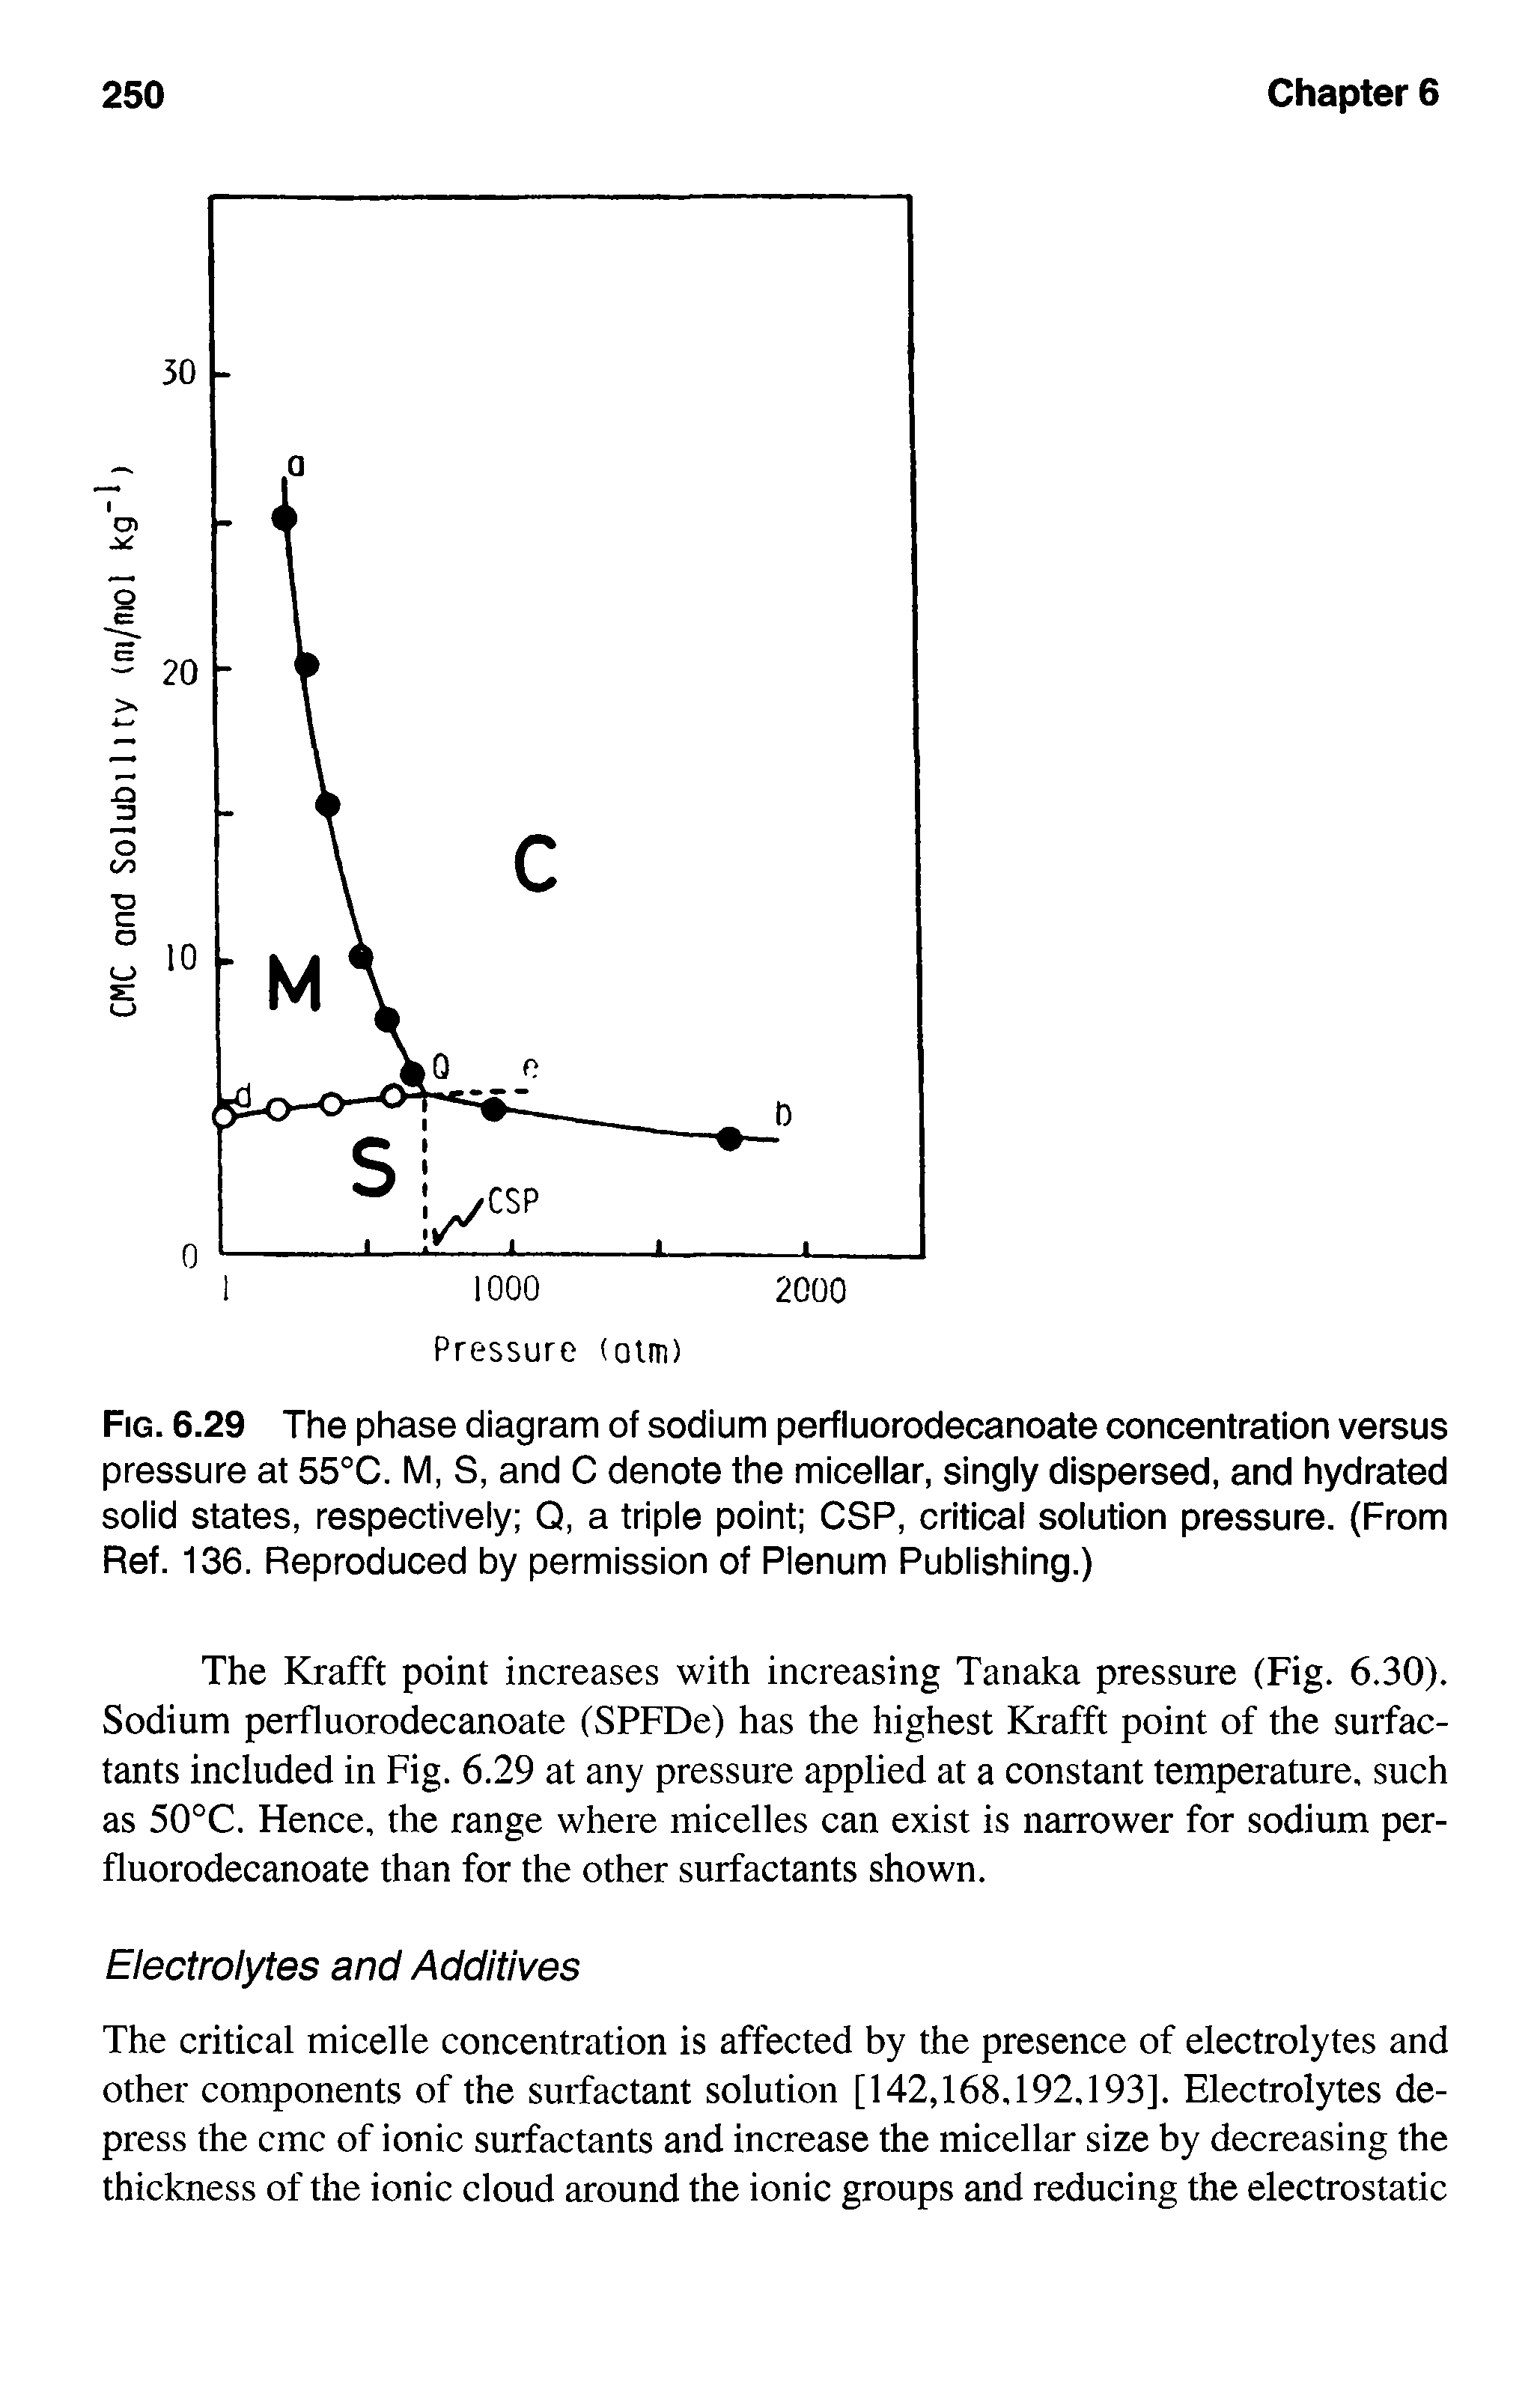 Fig. 6.29 The phase diagram of sodium perfluorodecanoate concentration versus pressure at 55°C. M, S, and C denote the micellar, singly dispersed, and hydrated solid states, respectively Q, a triple point CSP, critical solution pressure. (From Ref. 136. Reproduced by permission of Plenum Publishing.)...